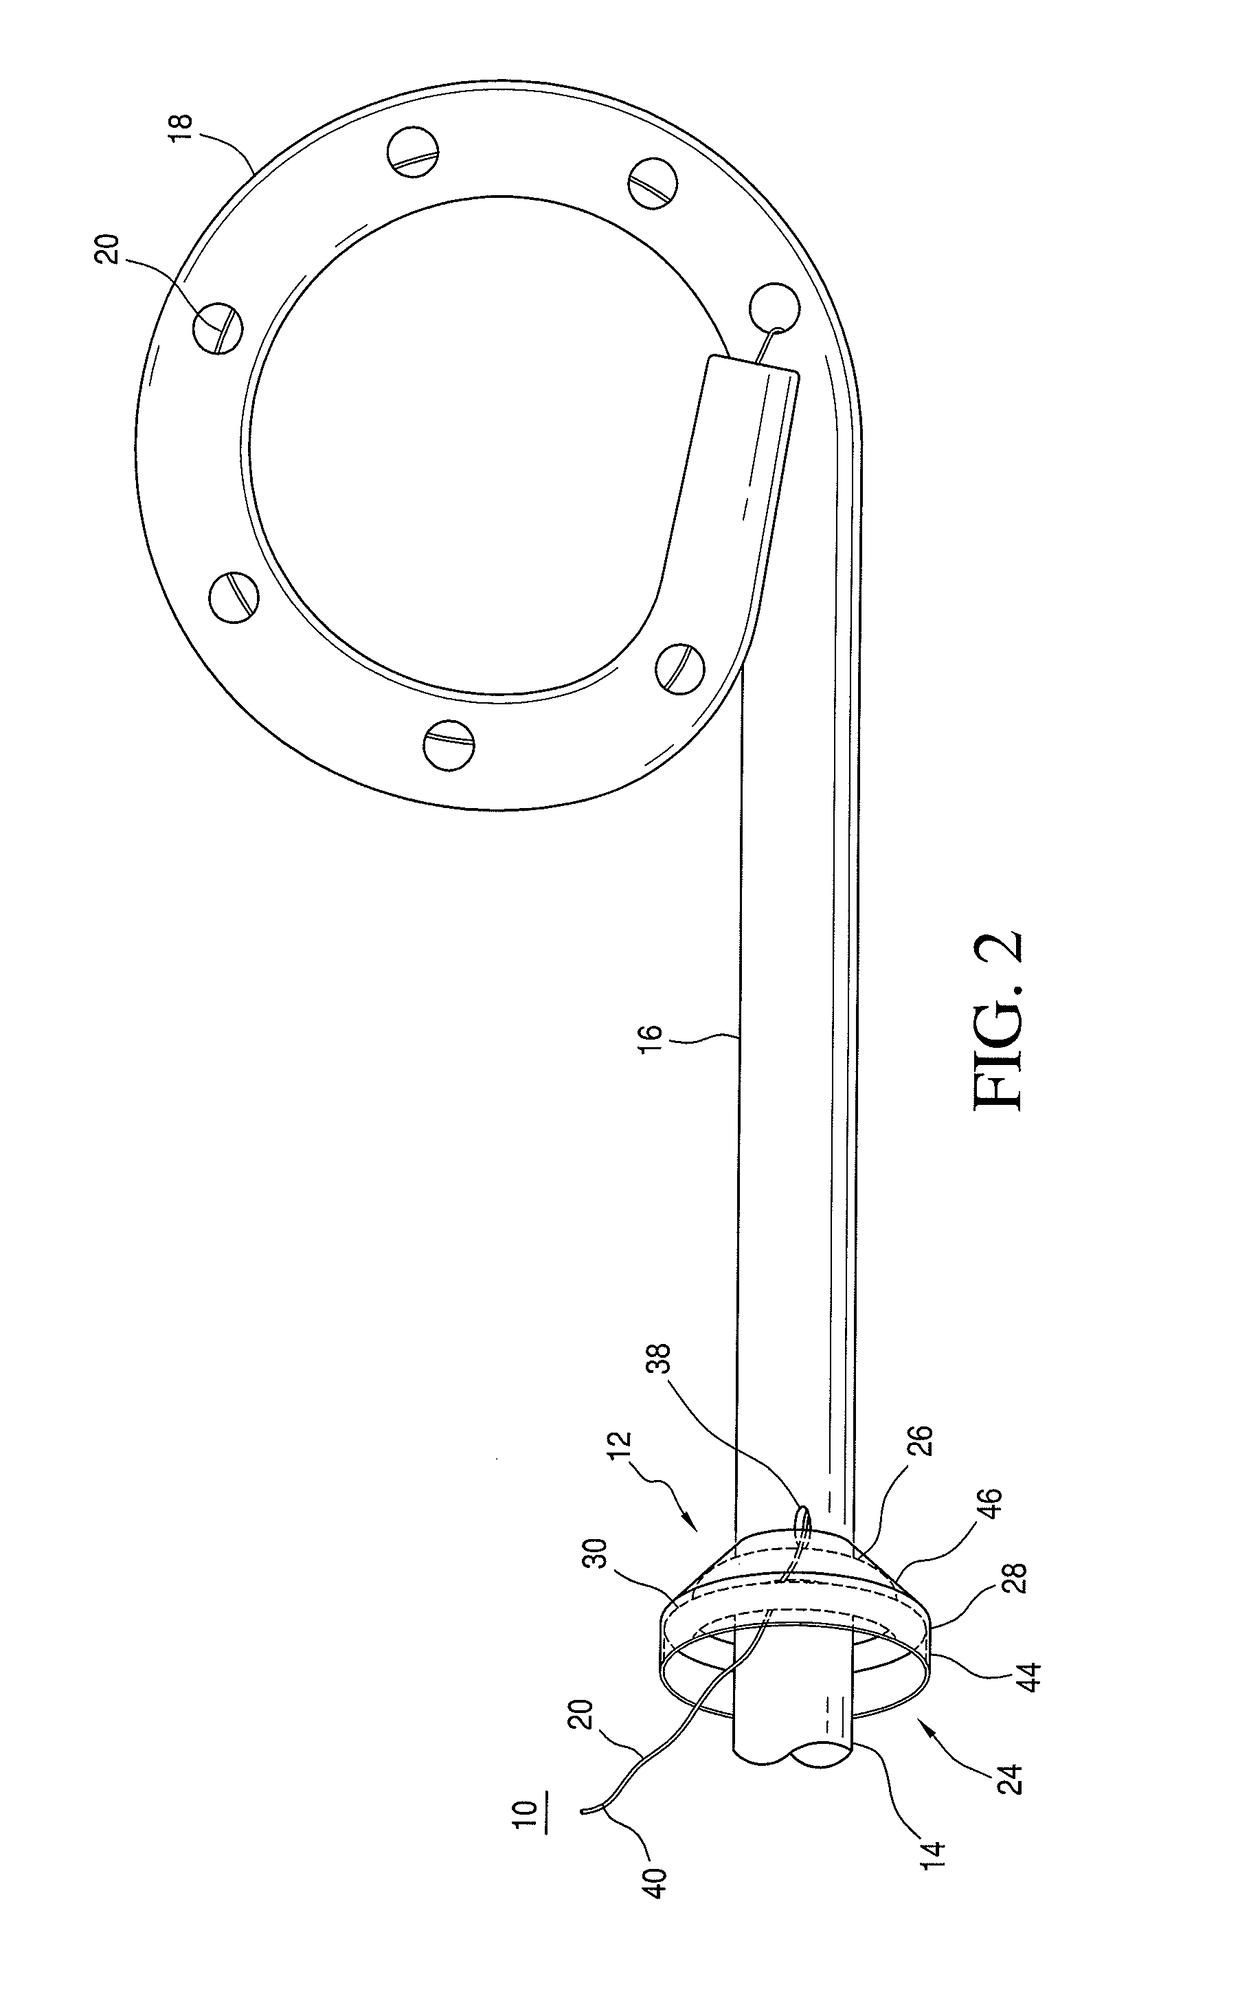 Locking assembly for a drainage catheter